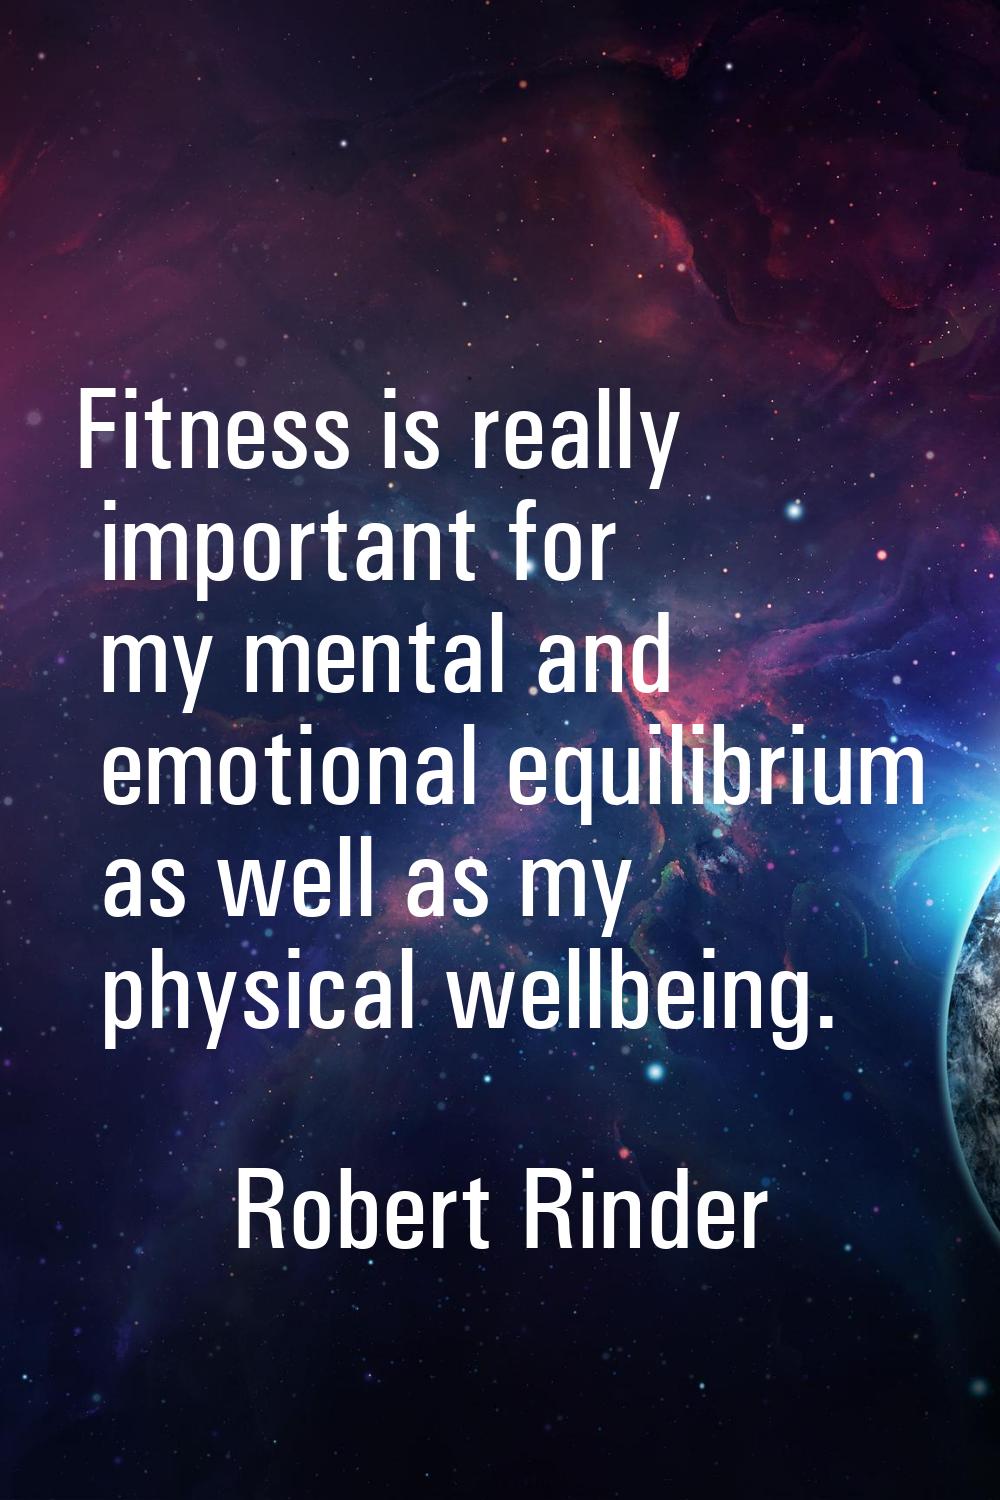 Fitness is really important for my mental and emotional equilibrium as well as my physical wellbein